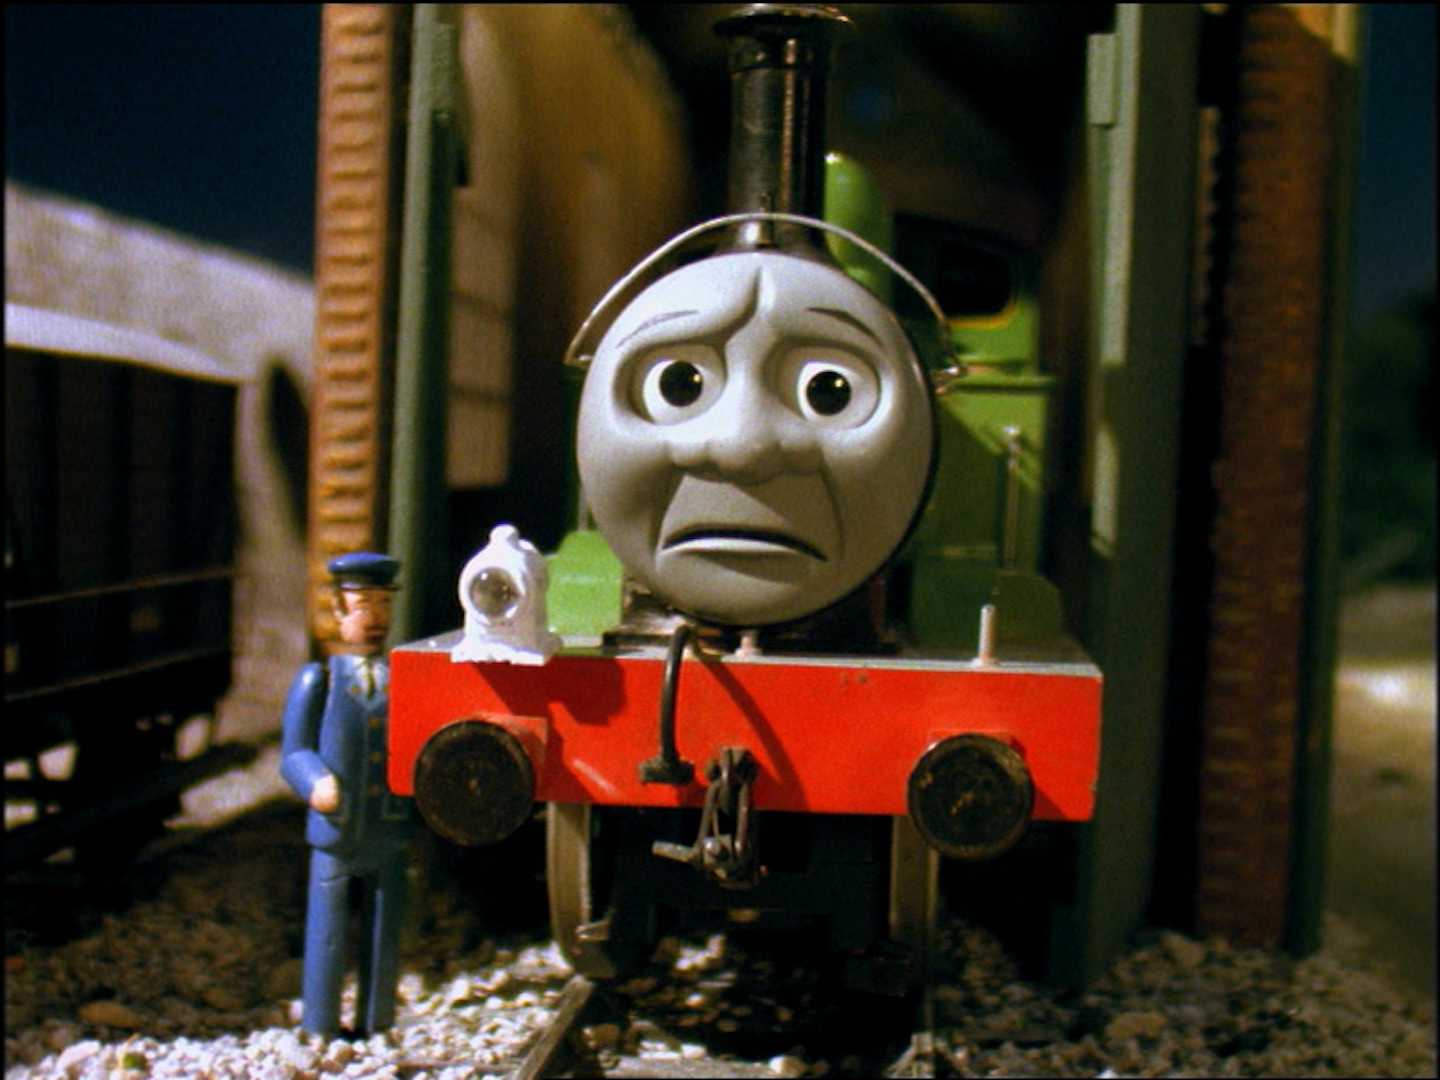 If Oliver was done, the only classic engines left would be Daisy and 